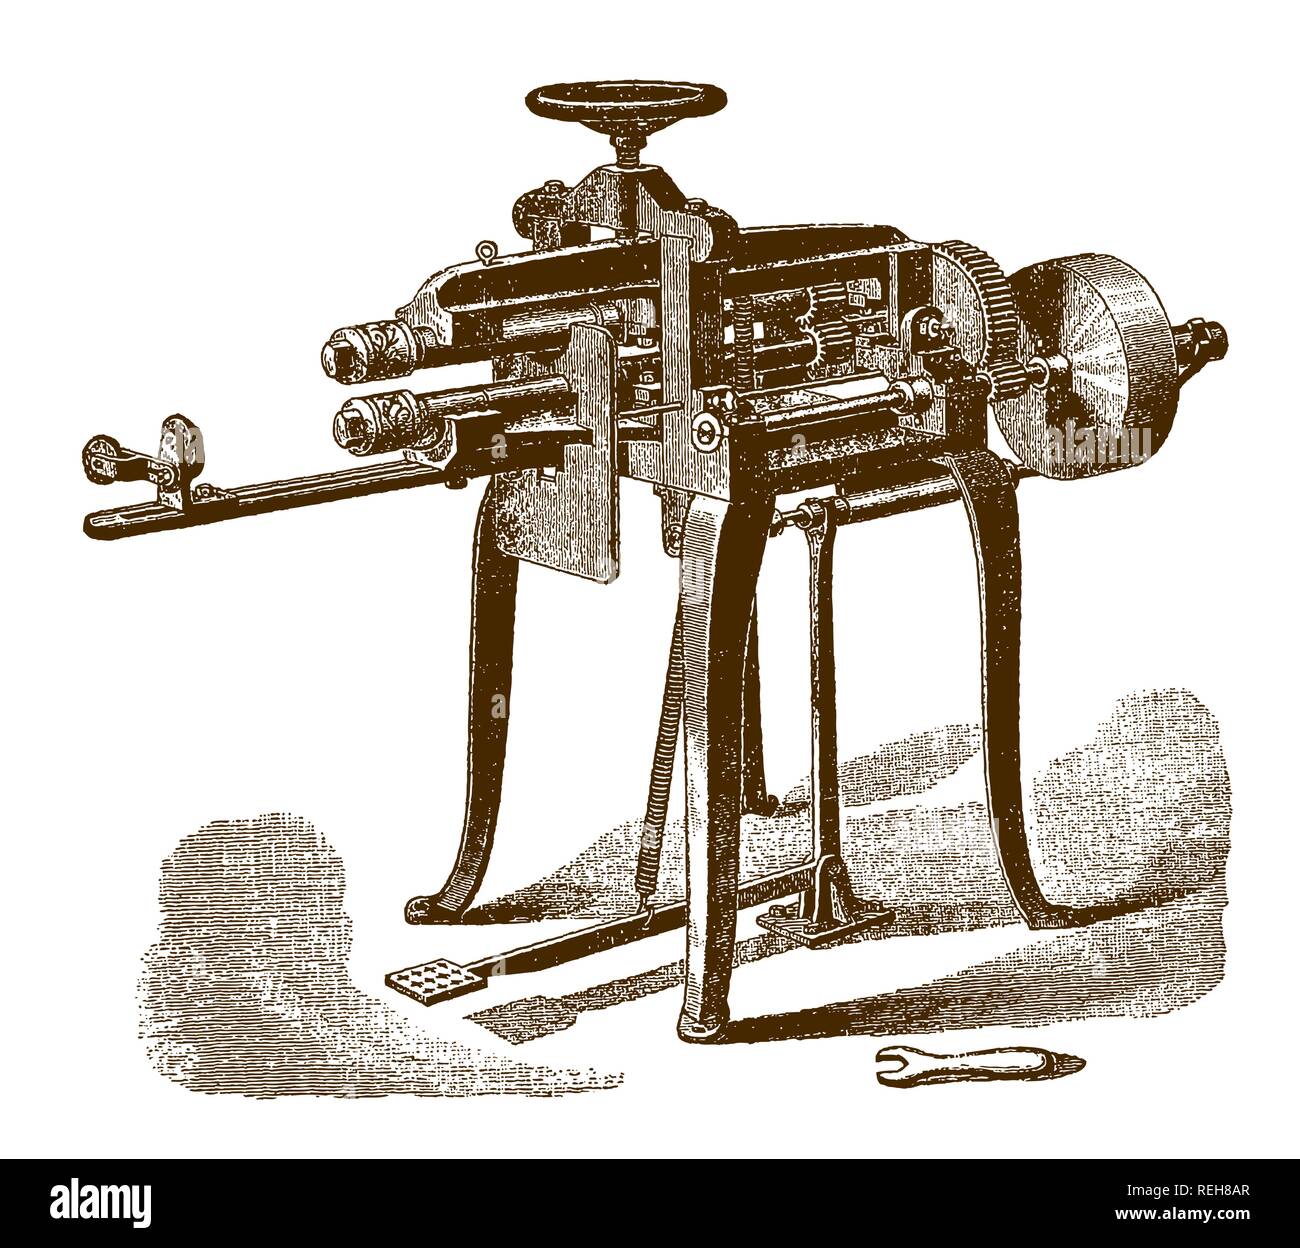 Historic beading machine (after an engraving or etching from the 19th century) Stock Vector